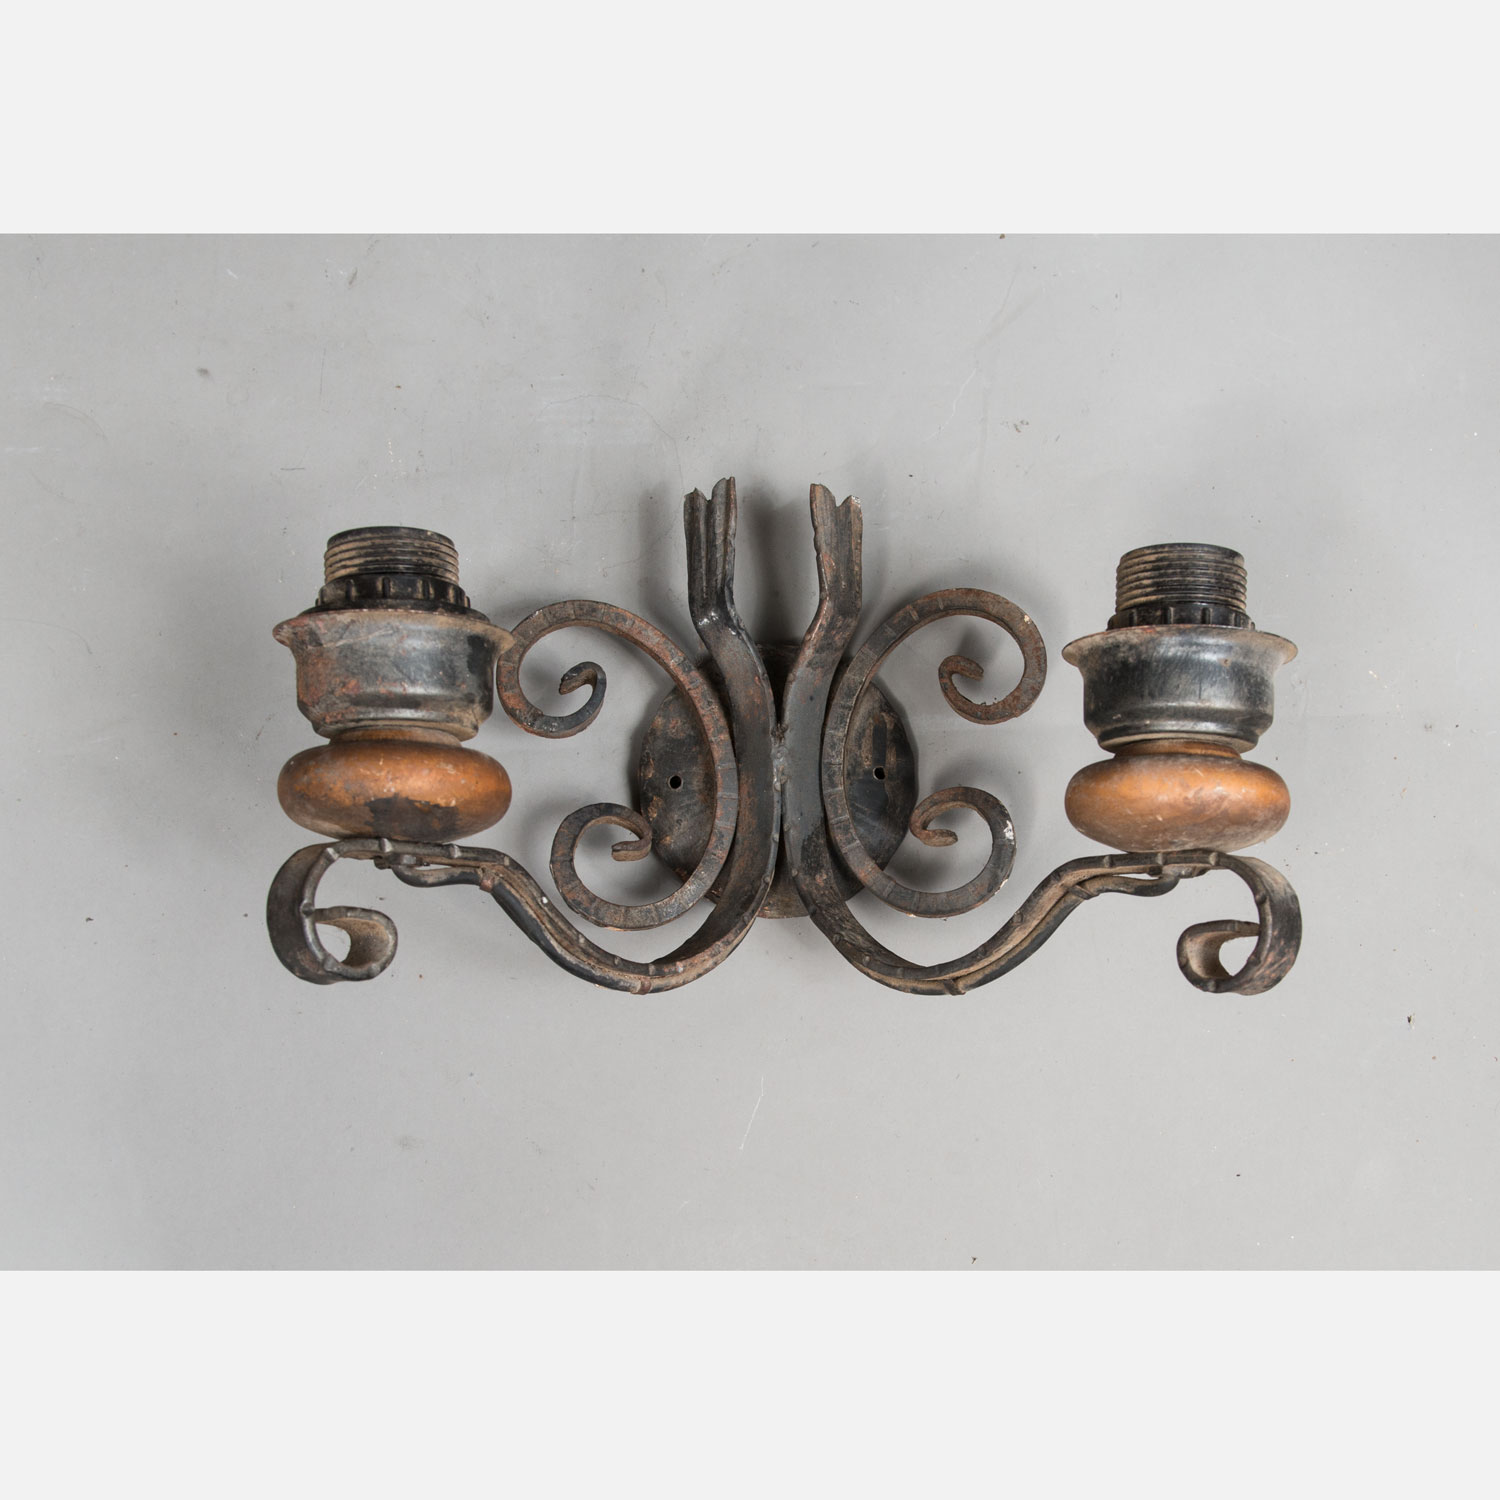 Two Iron Wall Lights - Image 3 of 3